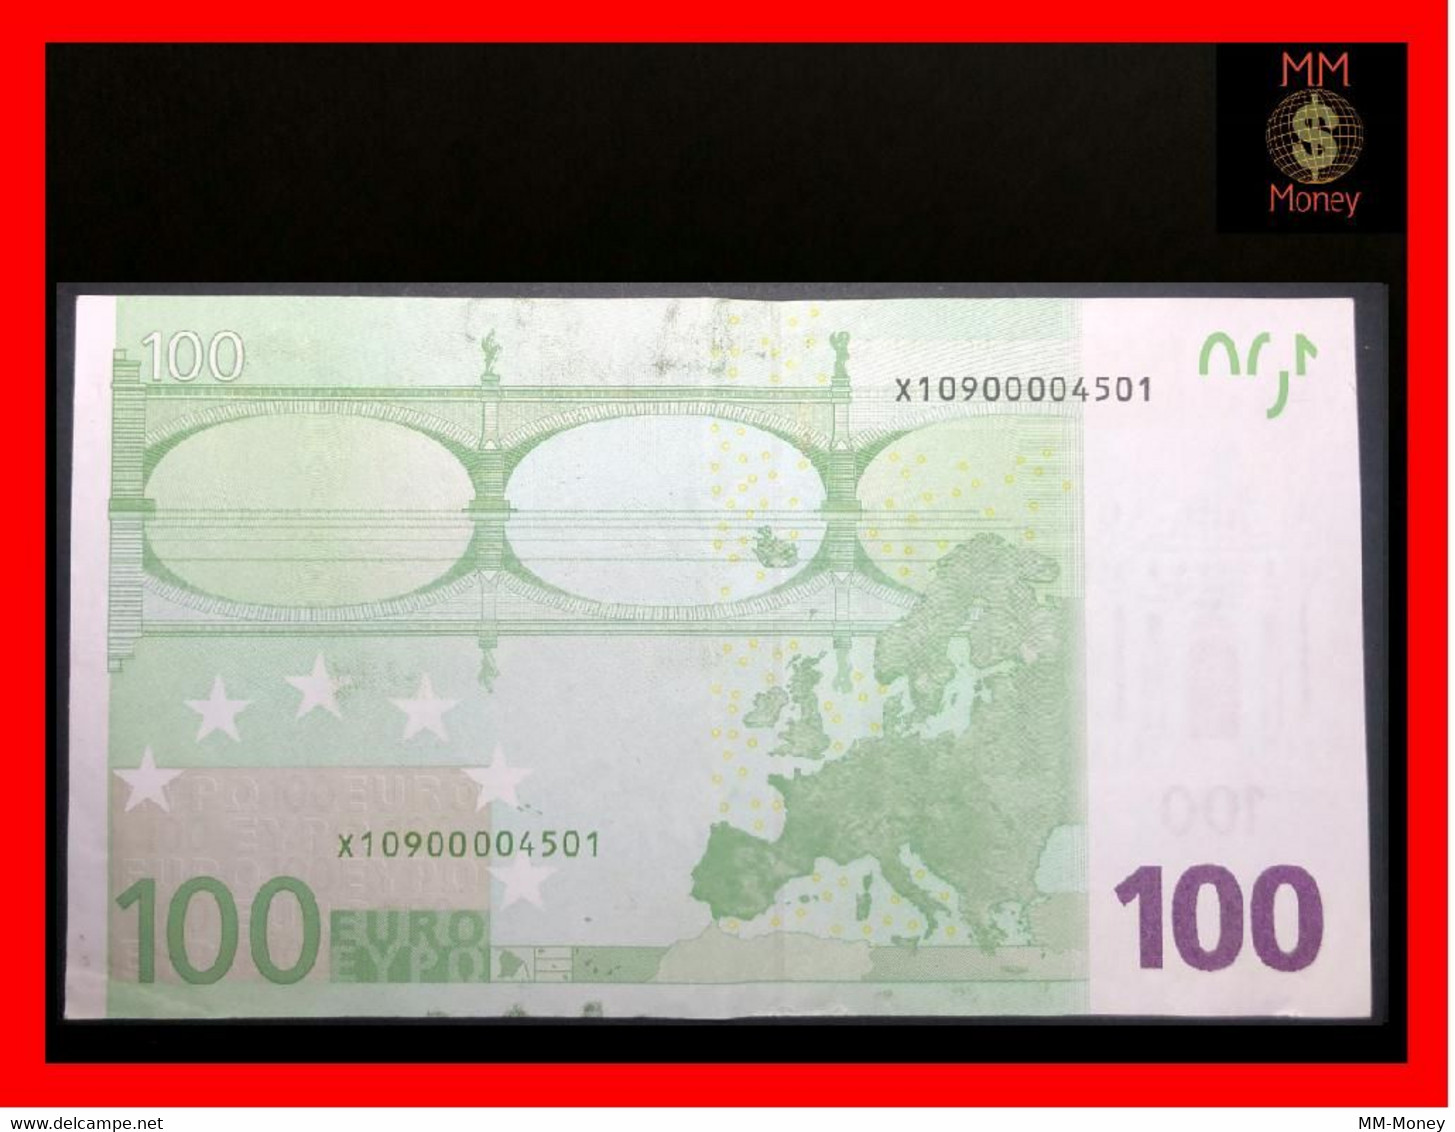 EURO 100 €  2011  Germany   "X"   Signature  Draghi  Very Low Serial 00004501   ***rare***   XF     [MM-Money ] - 100 Euro